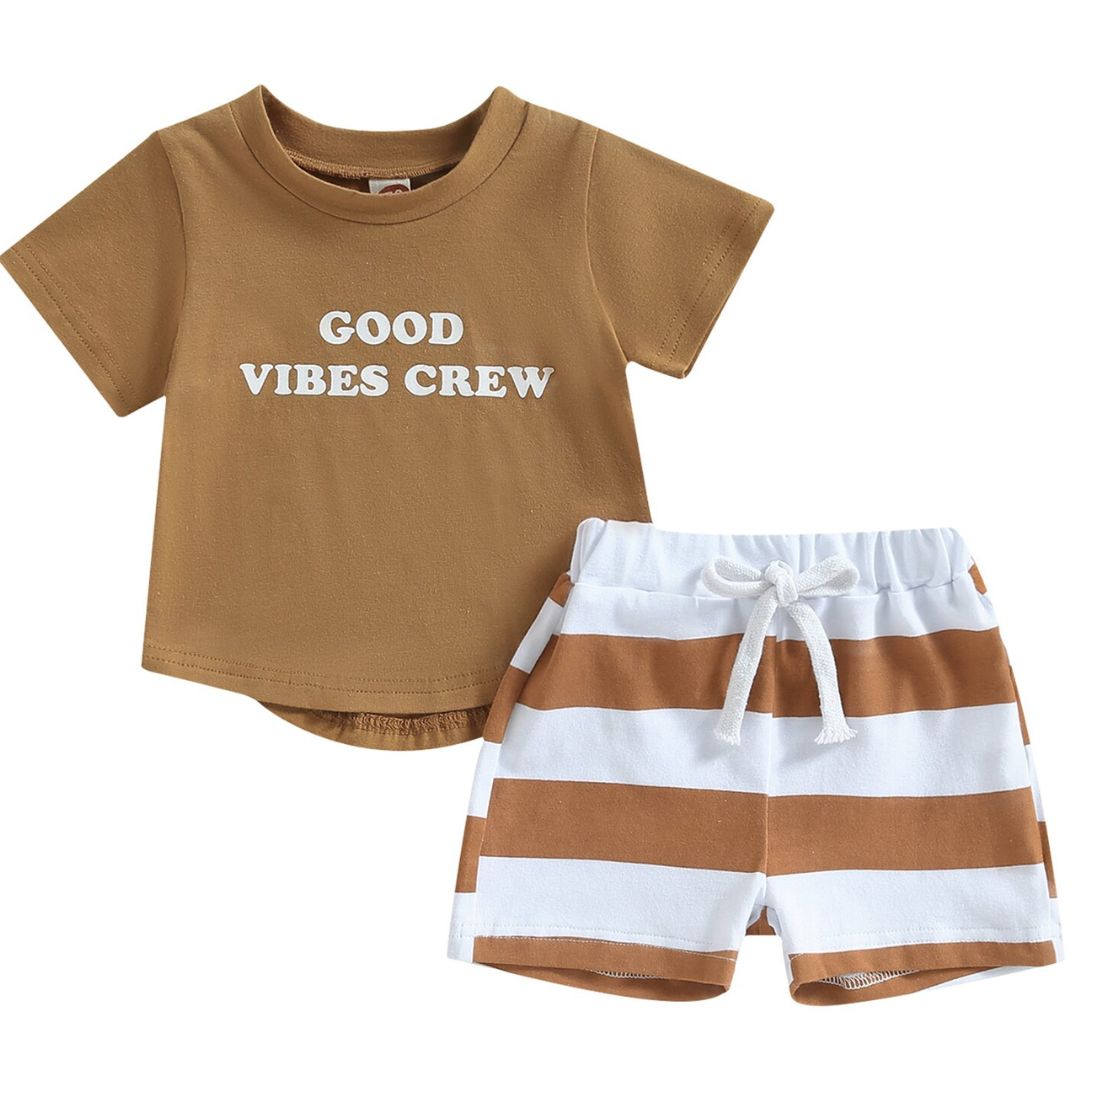 Little Boy Good Vibes Crew 2-Piece Outfit Set- My Trendy Youngsters | Buy Trendy and Afforable Baby and Toddler Clothing Sets @ My Trendy Youngsters - Dress your little man in Style @ My Trendy Youngsters 